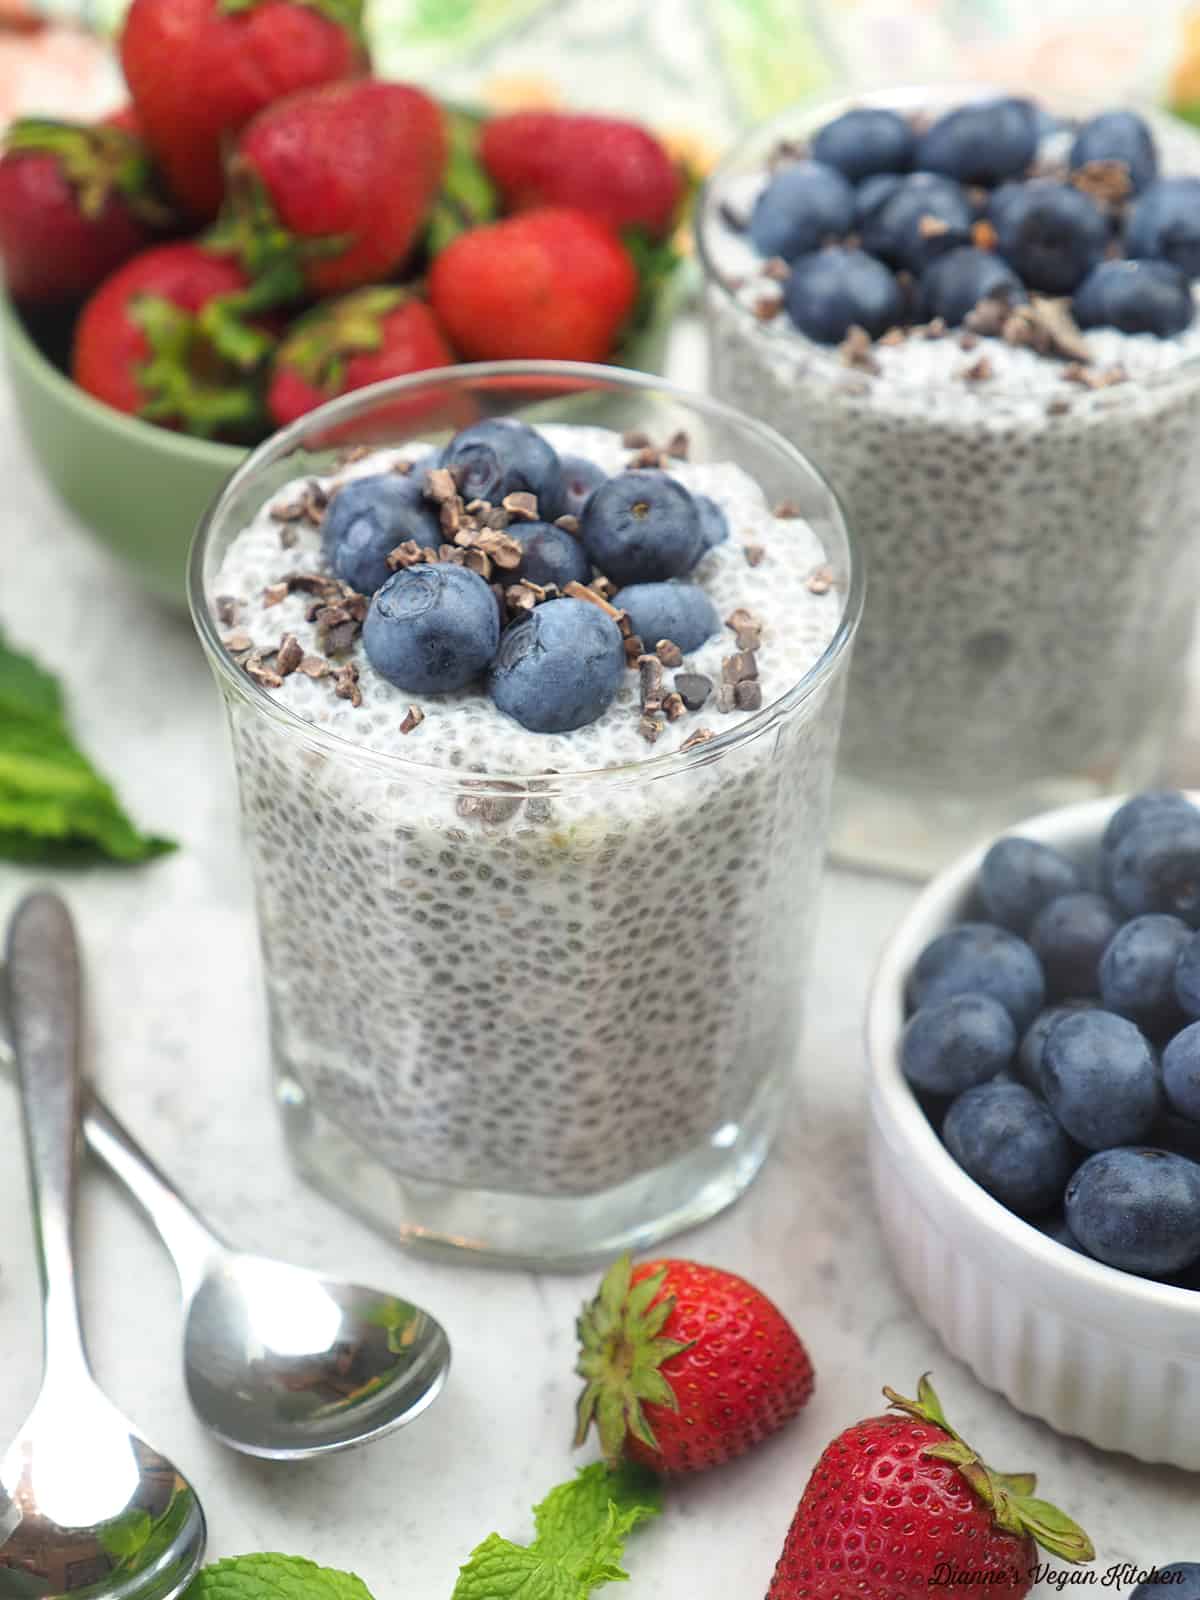 two chia puddings with a bowl of blueberries, spoons, and a bowl of strawberries